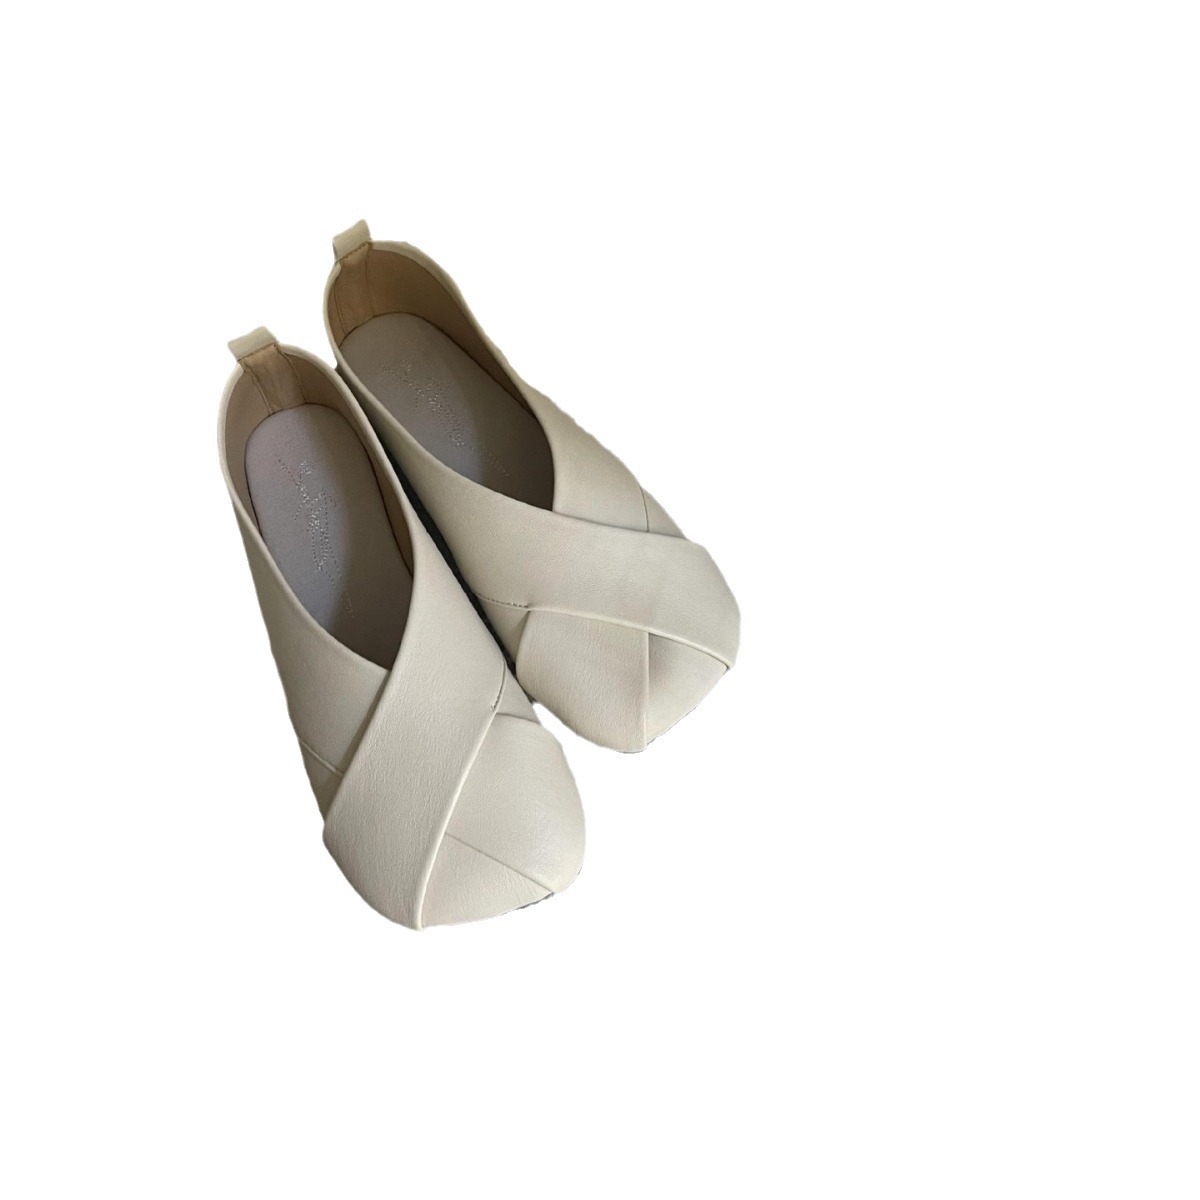 MMXXIV Spring New Arrival: French Style Mary Jane Evening Shoes with Square Toe